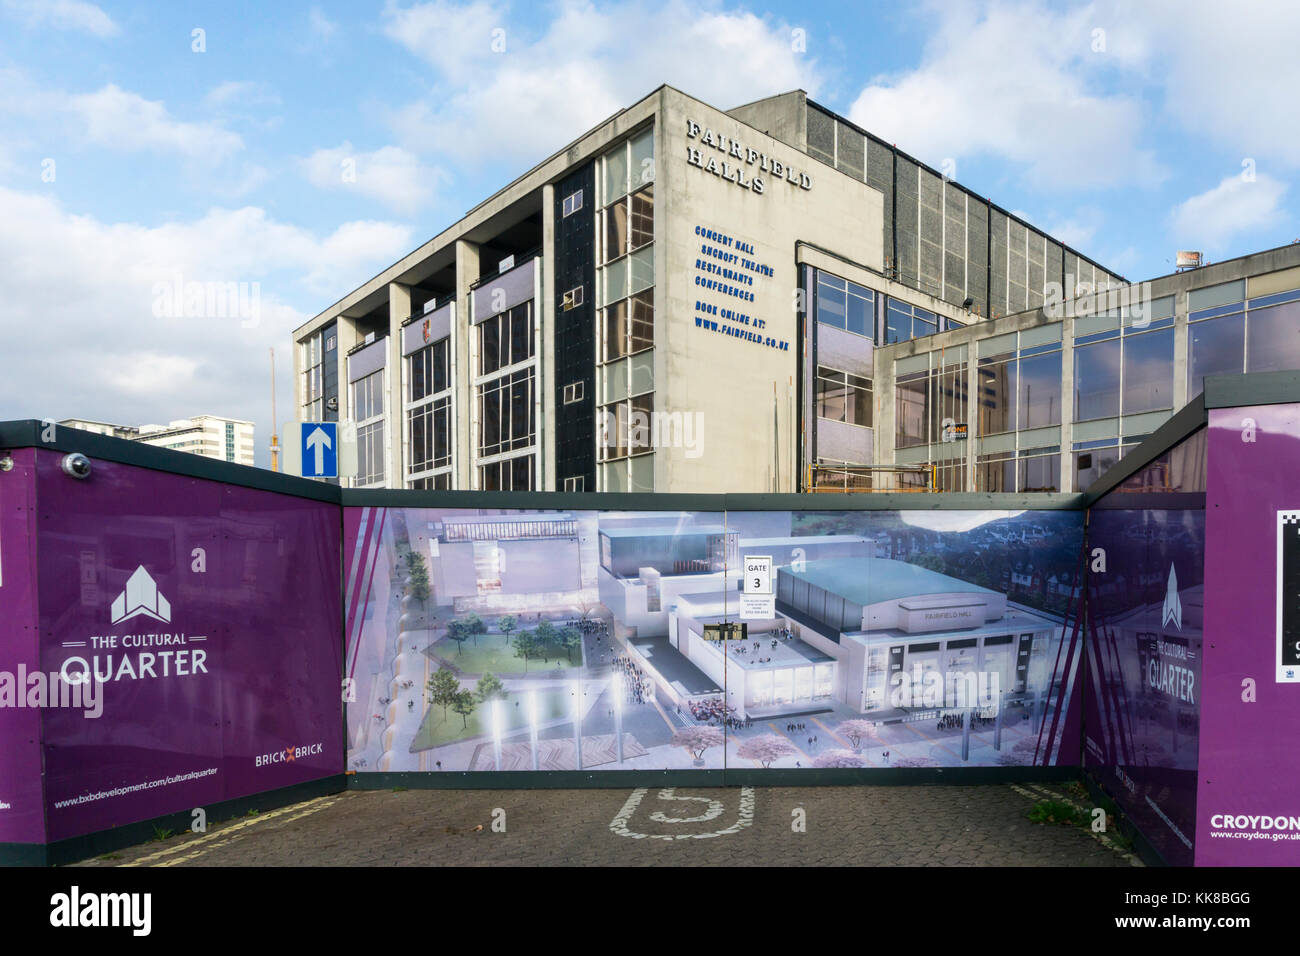 The Fairfield Halls arts complex in Croydon is undergoing a £30m redevelopment as the centre of Croydon's cultural quarter. Stock Photo